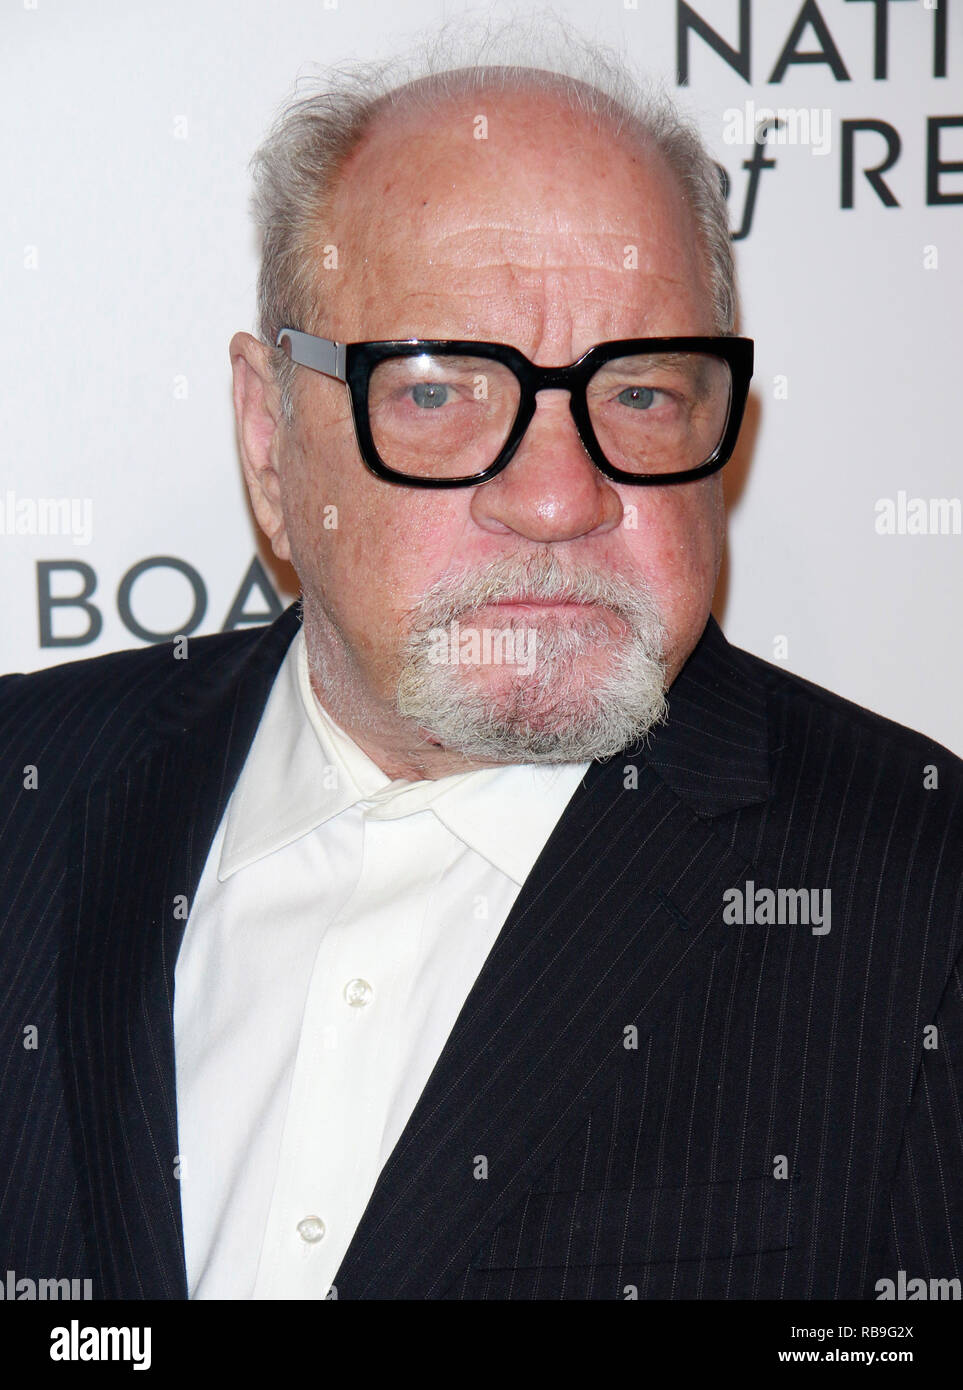 New York, NY, USA. 08th Jan, 2019. Paul Schrader at The National Board of Review Annual Awards Gala at Cipriani in New York City on January 8, 20189. Credit: Diego Corredor/Media Punch/Alamy Live News Credit: MediaPunch Inc/Alamy Live News Stock Photo